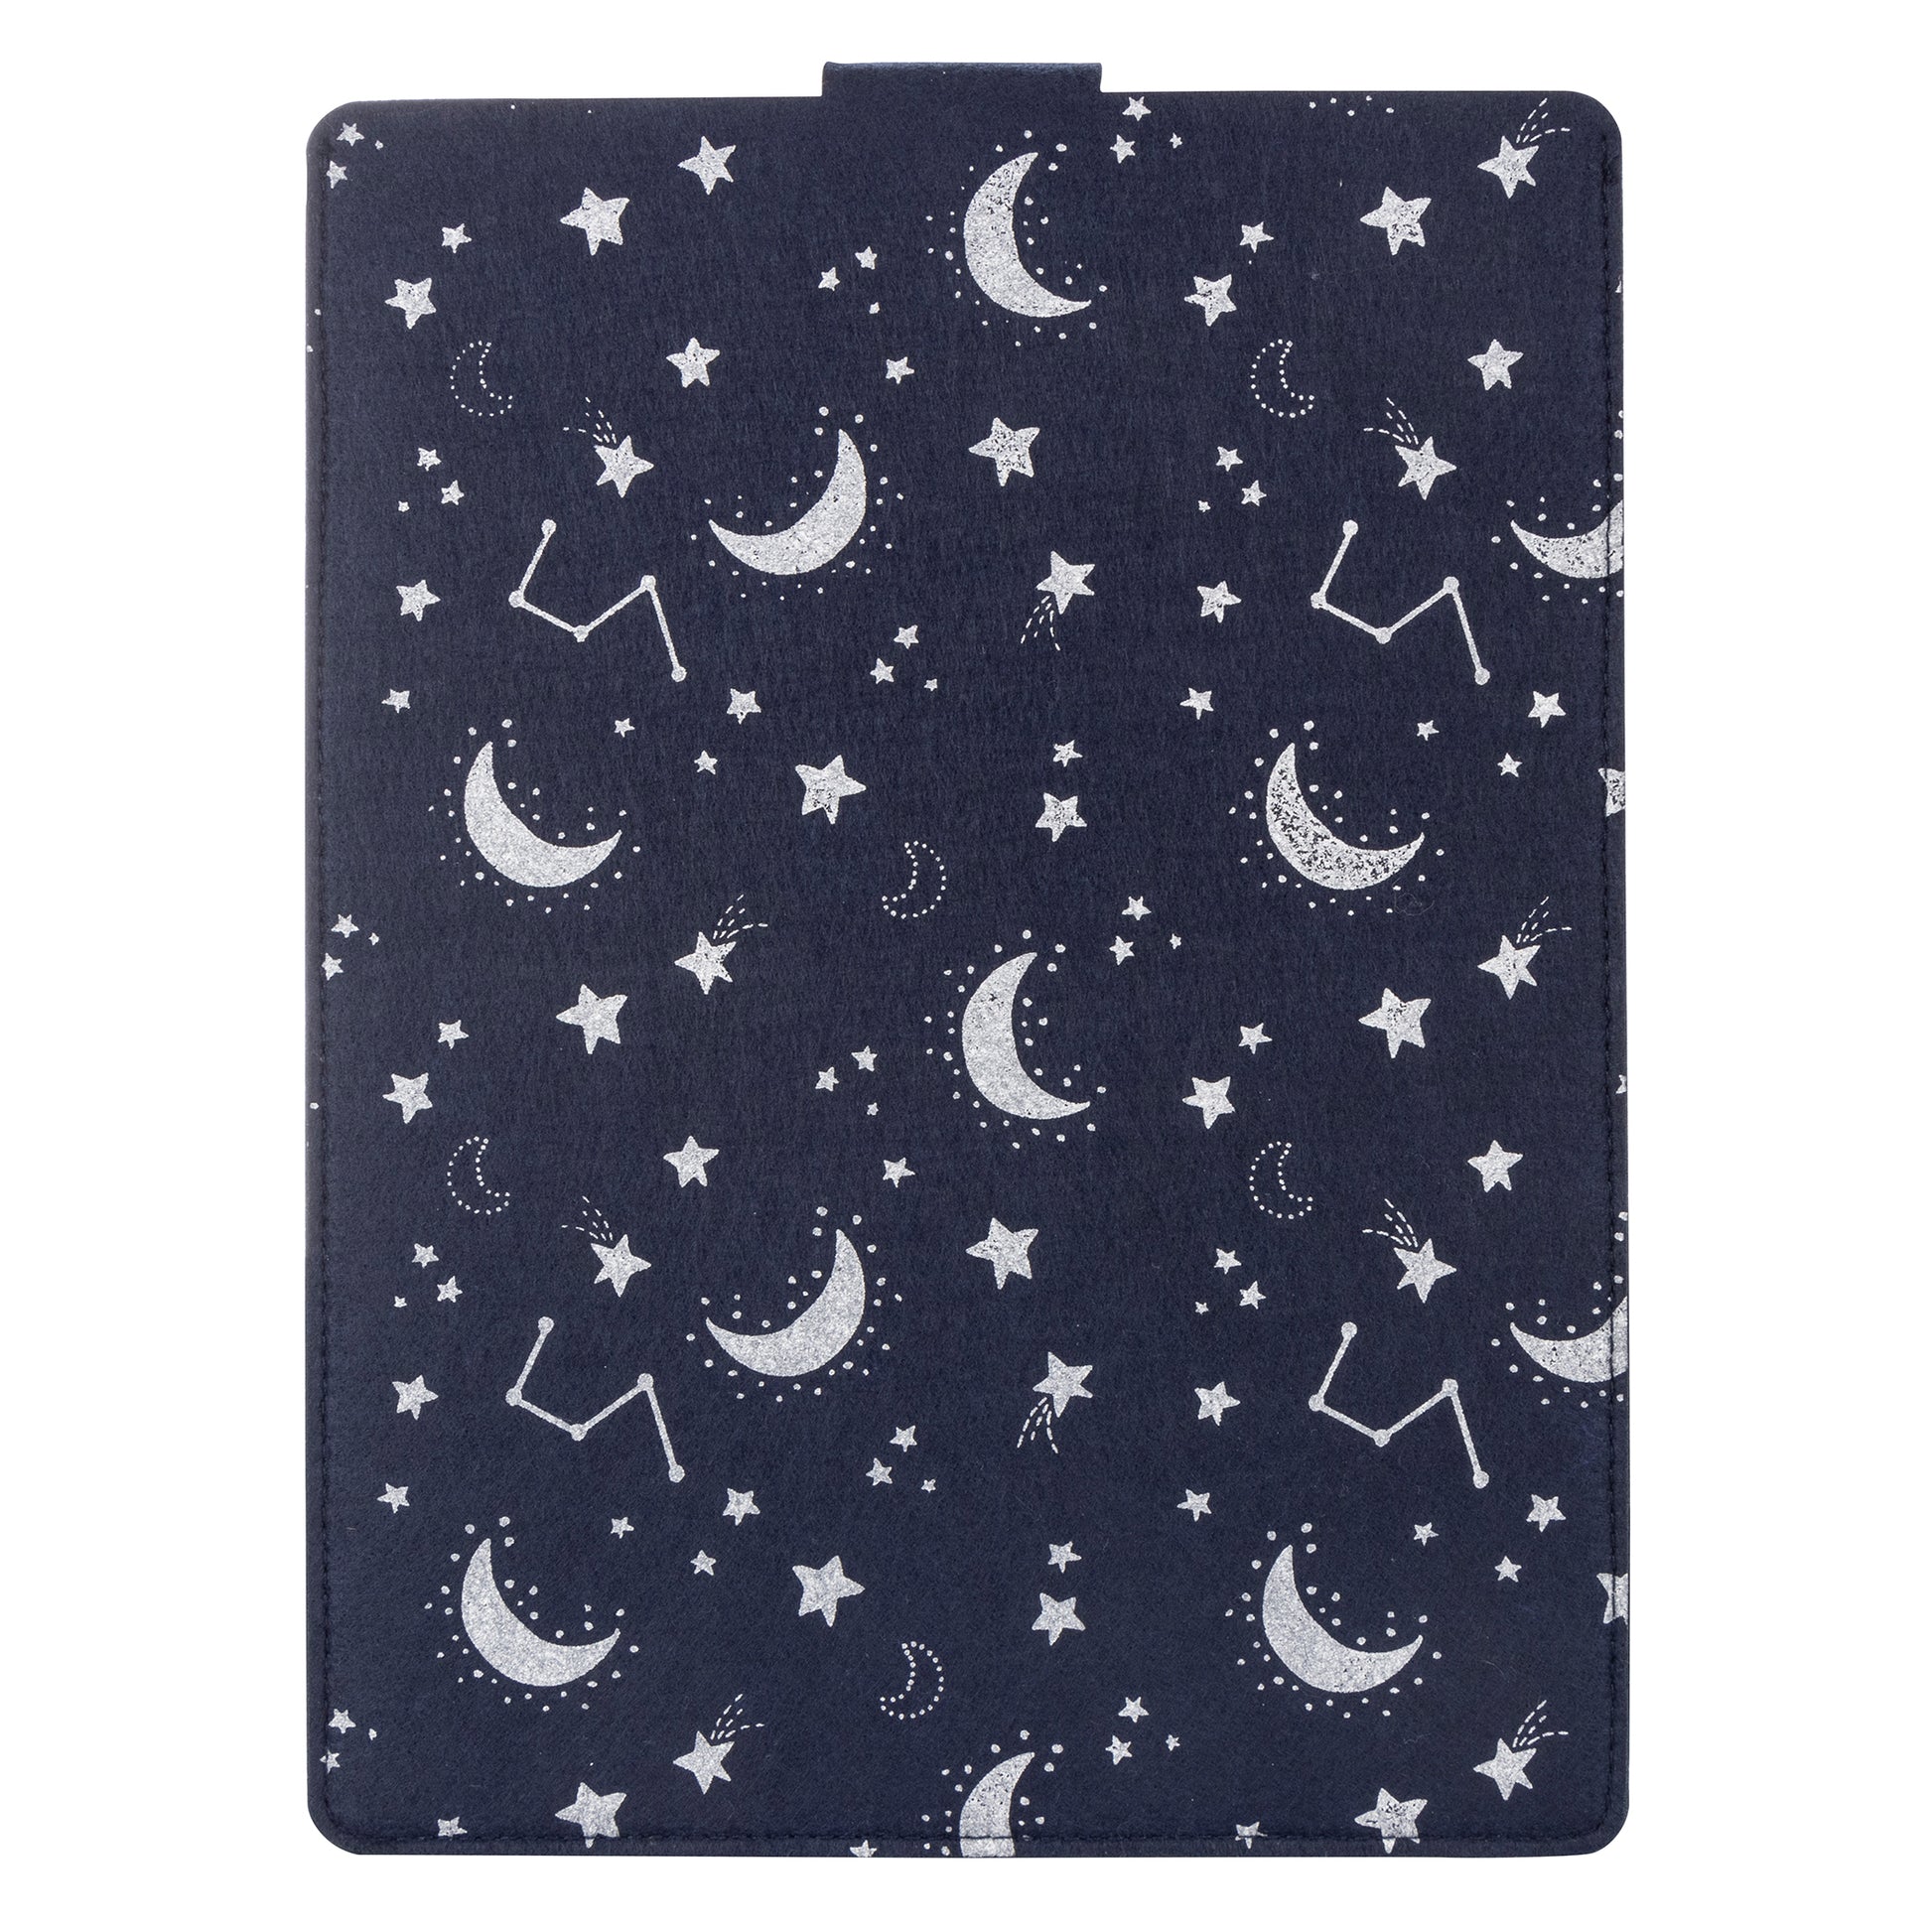 Constellation Felt Laptop Sleeve Carrying Case - Back view